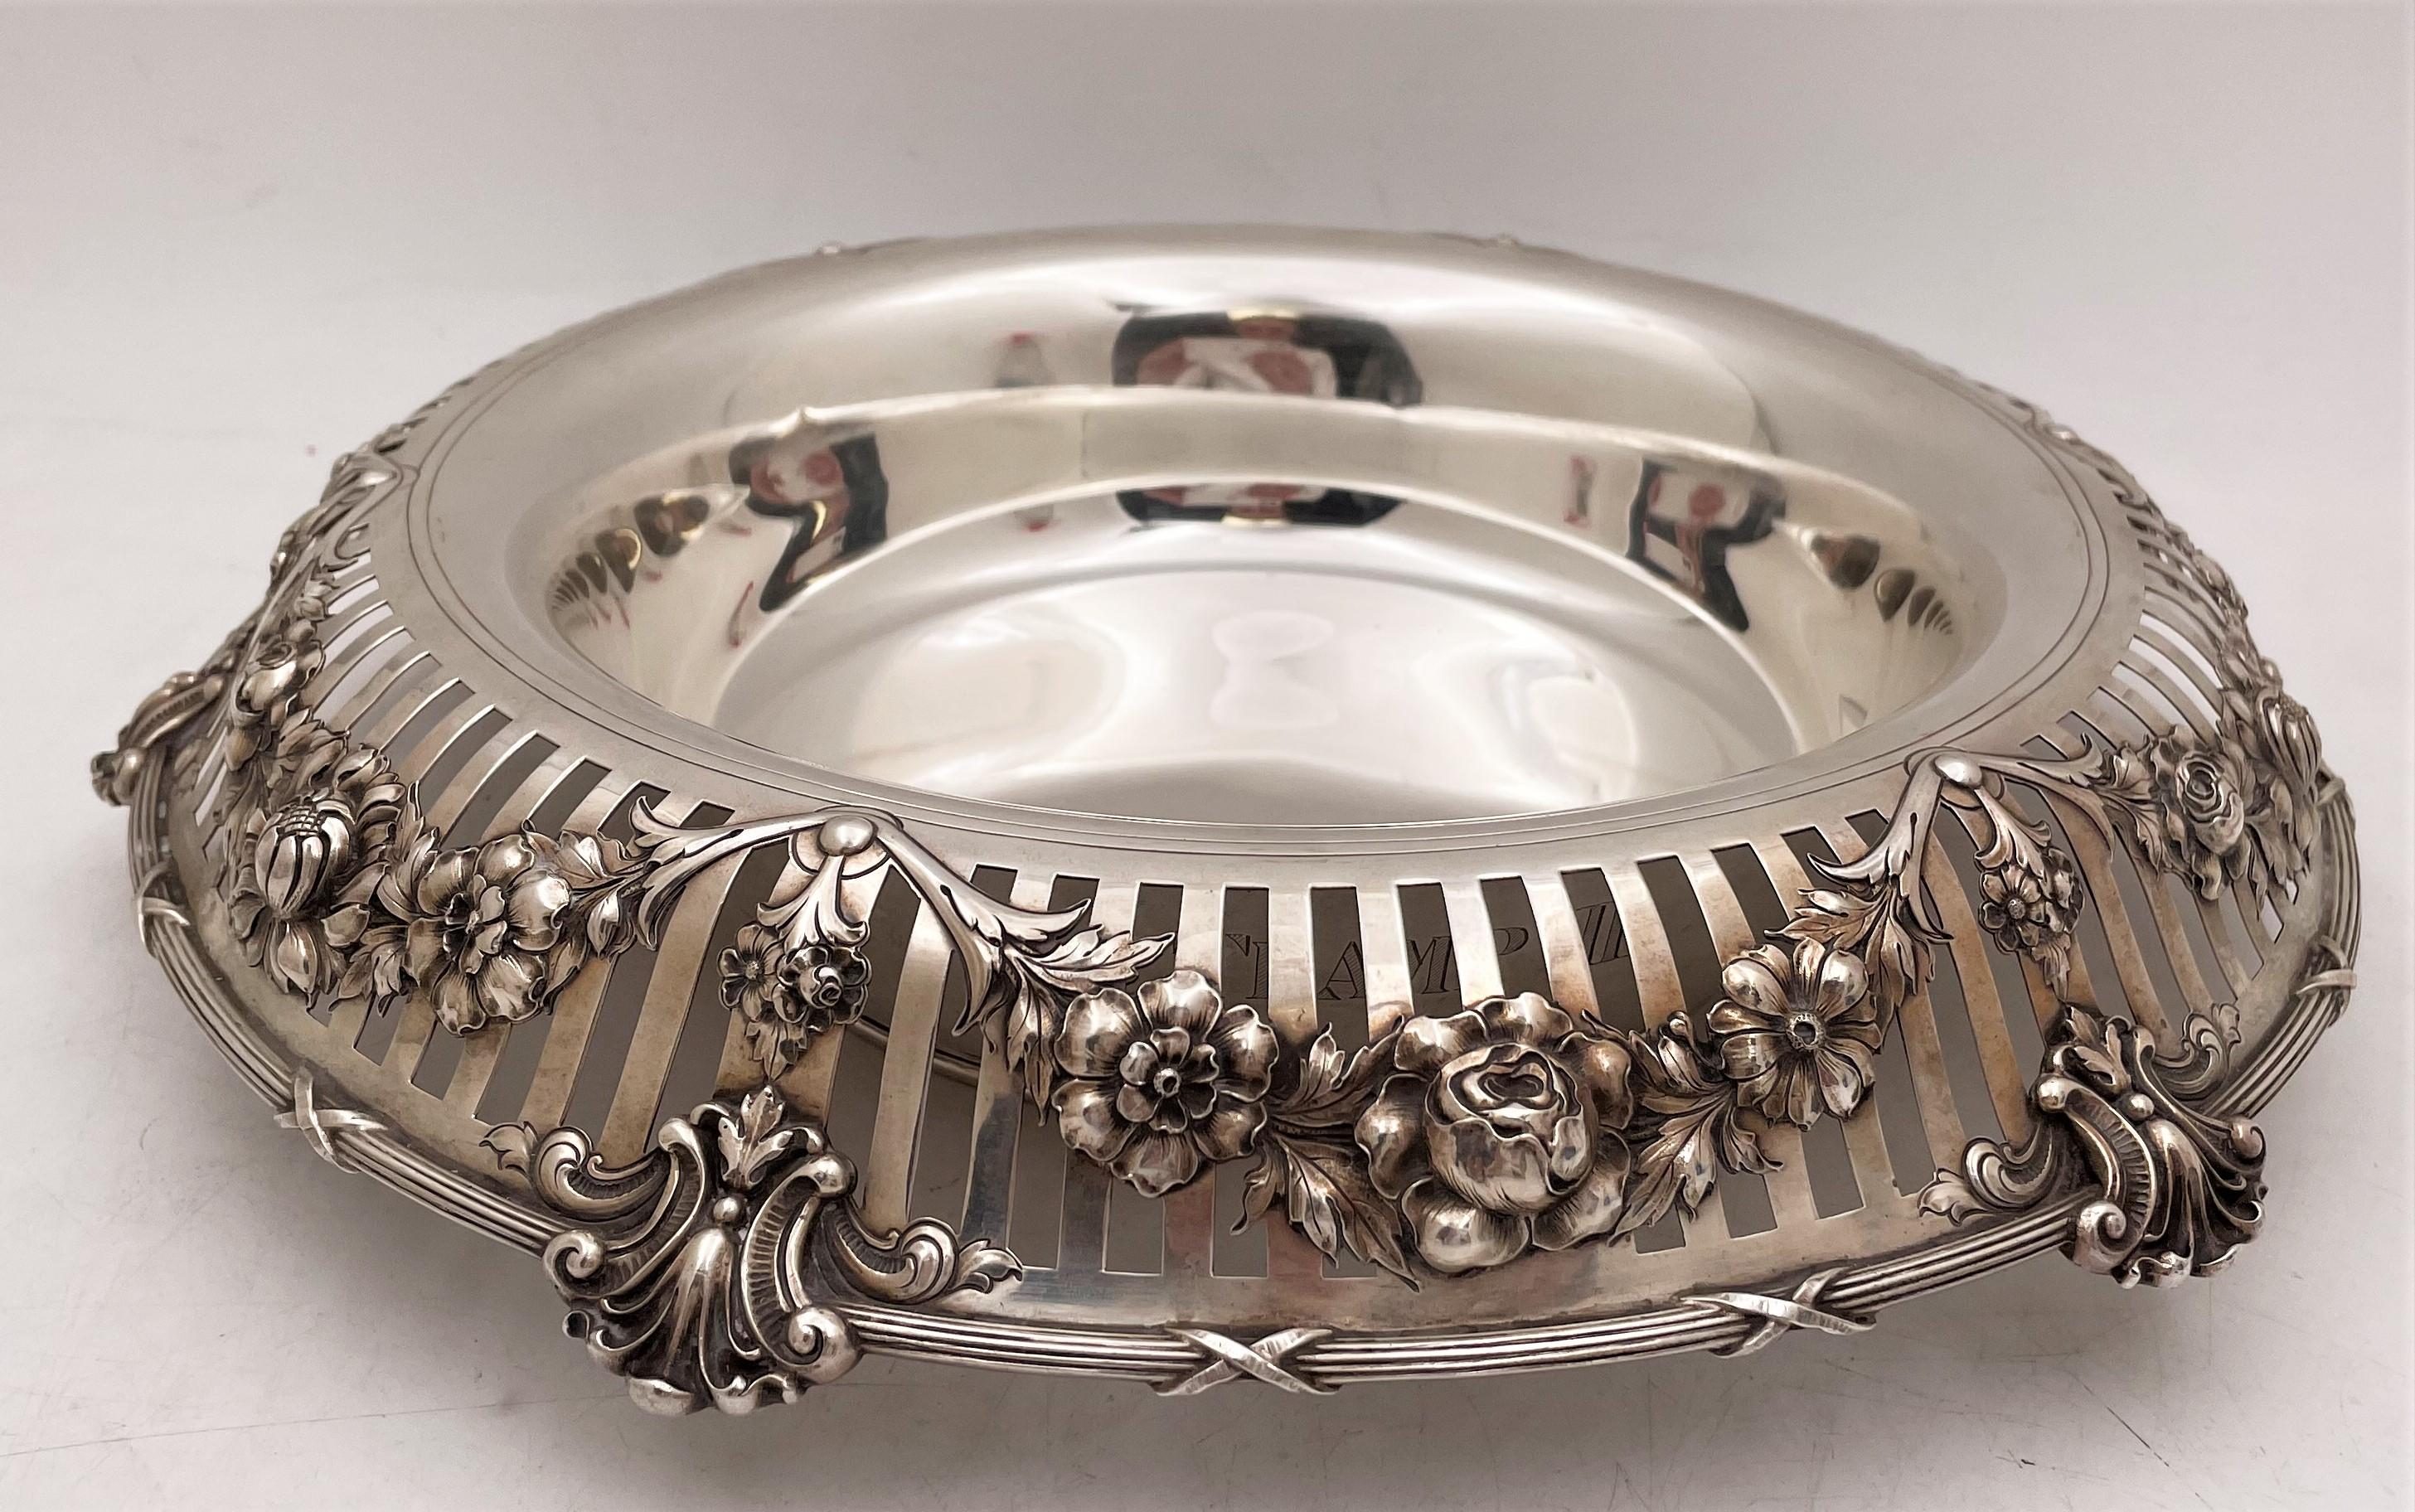 Gorham, sterling silver centerpiece bowl from 1911 in Art Nouveau style with exquisite, realistic, floral garlands in relief on the pierced rim of the bowl. It measures 12 1/2'' in diameter (inner diameter is 9'') by 2 7/8'' in height, weighs 28.7